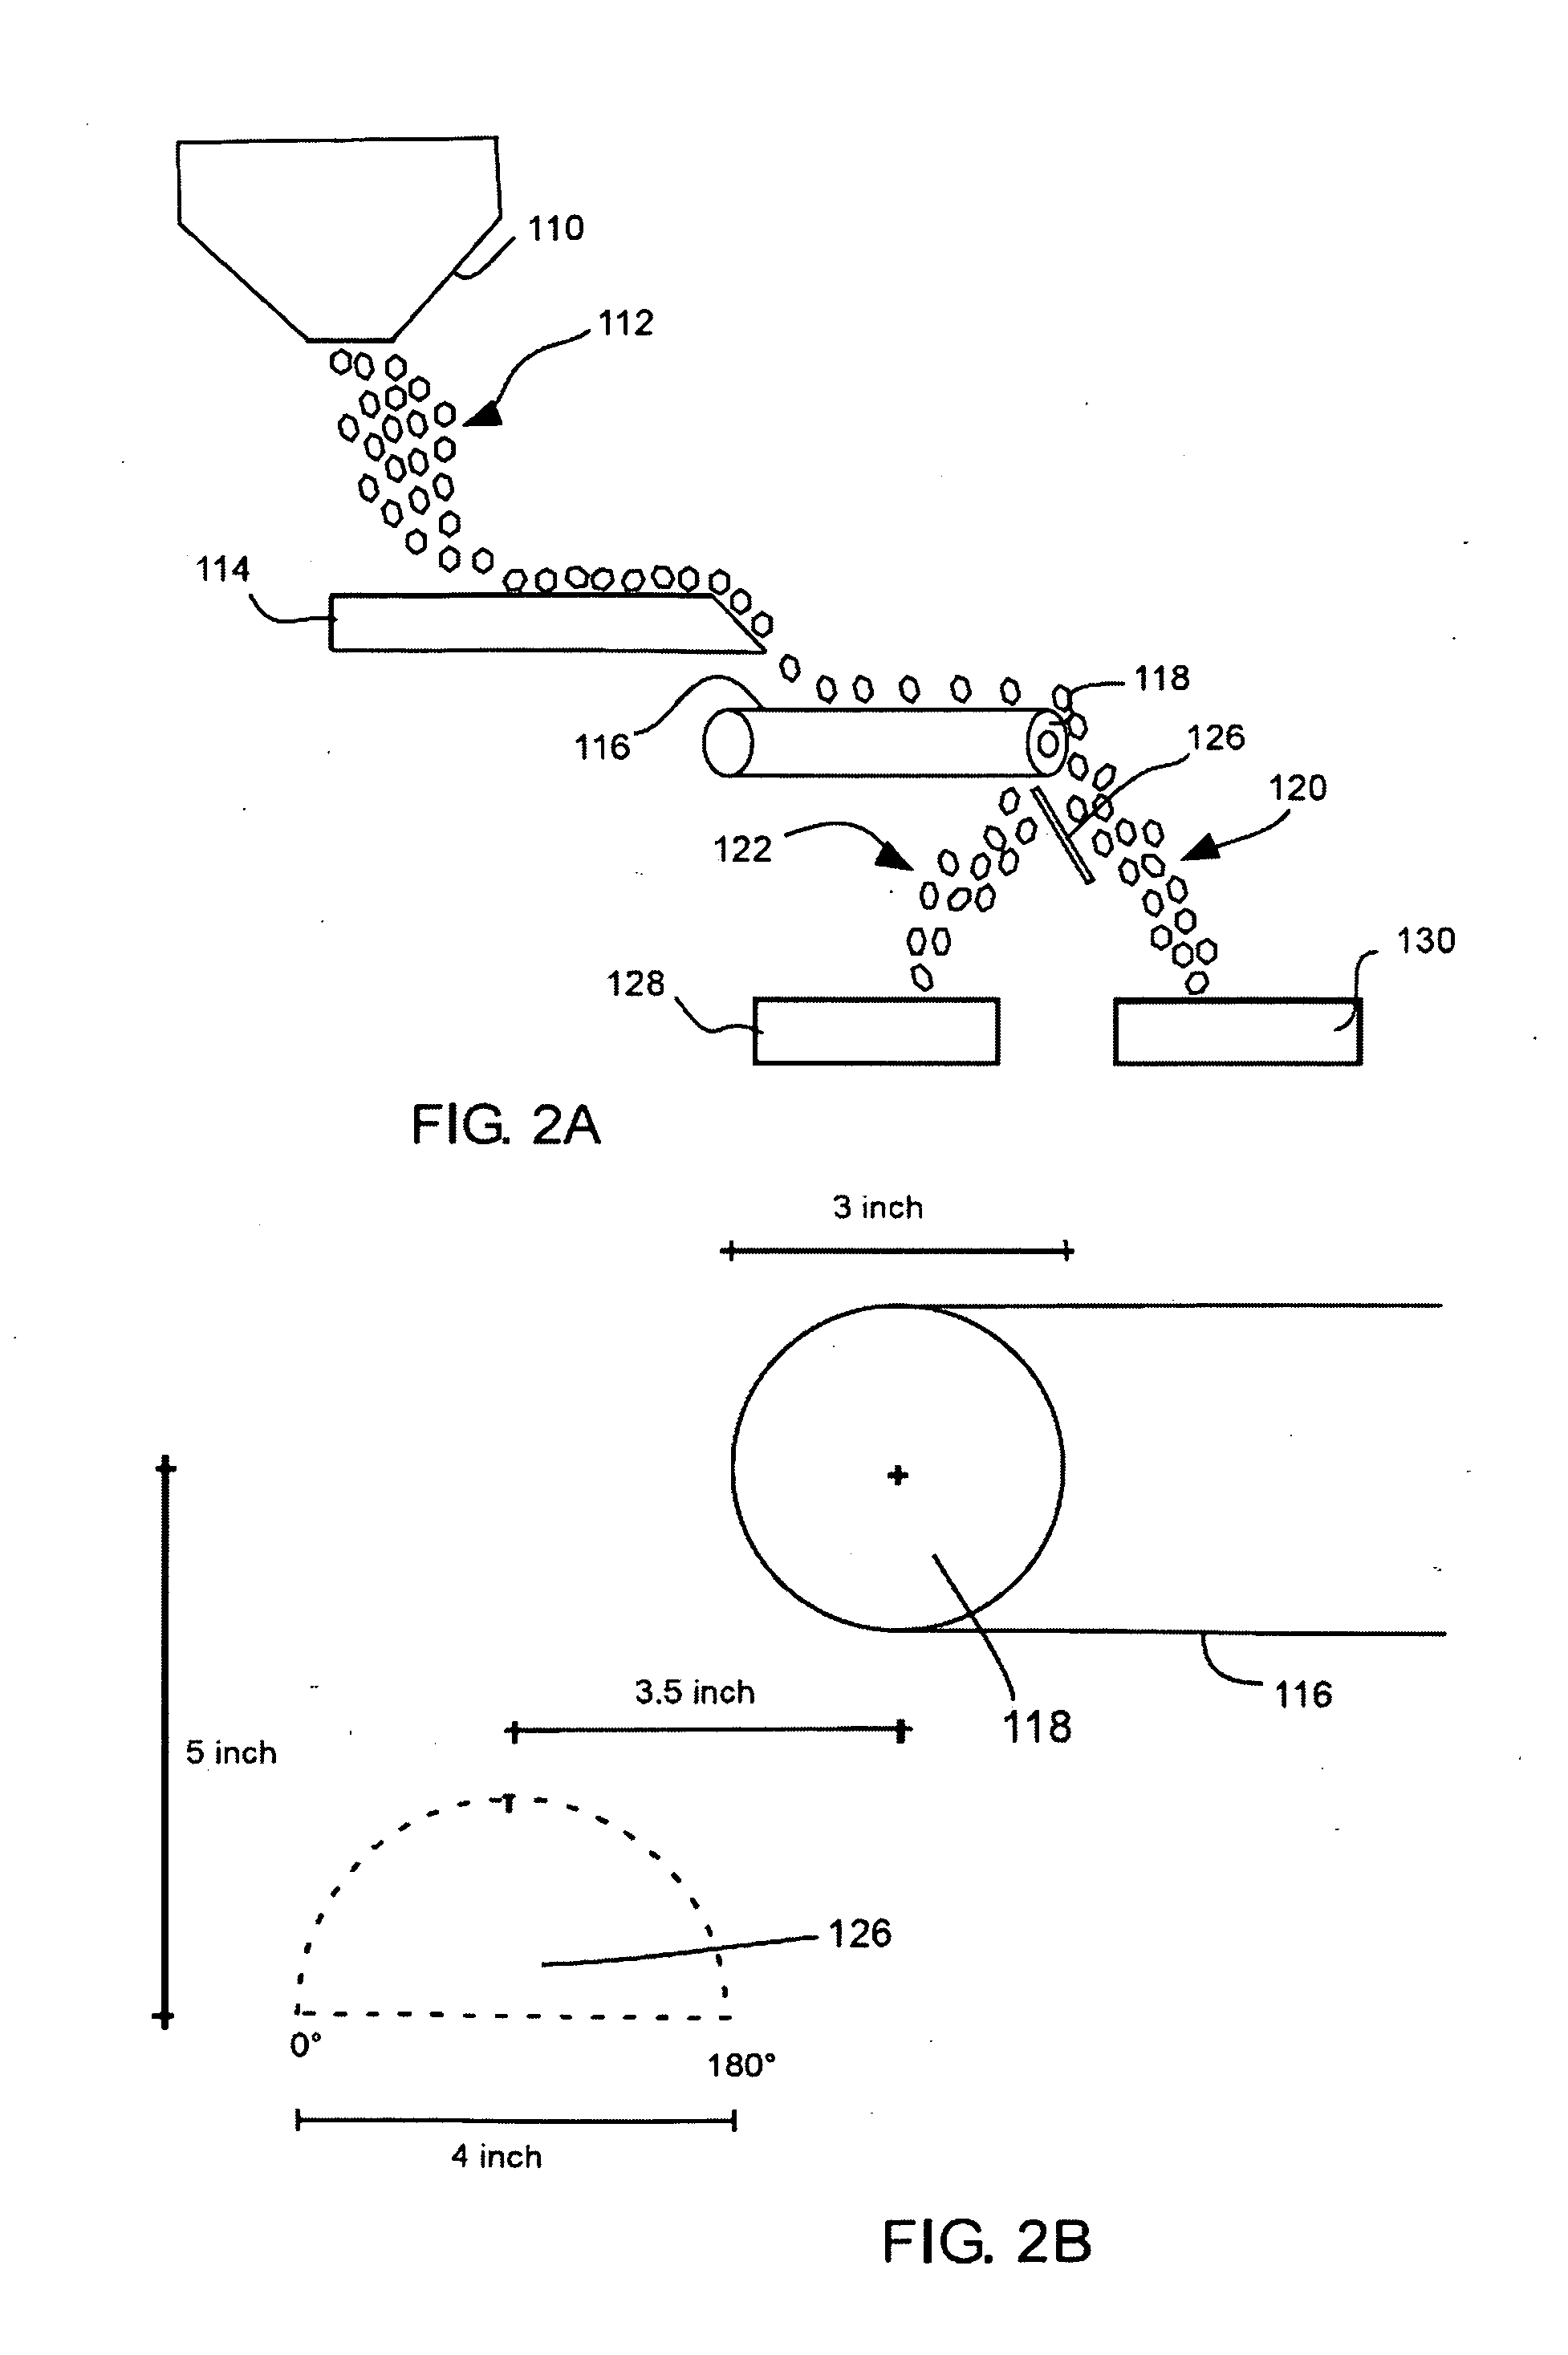 Systems and processes for producing high purity trona